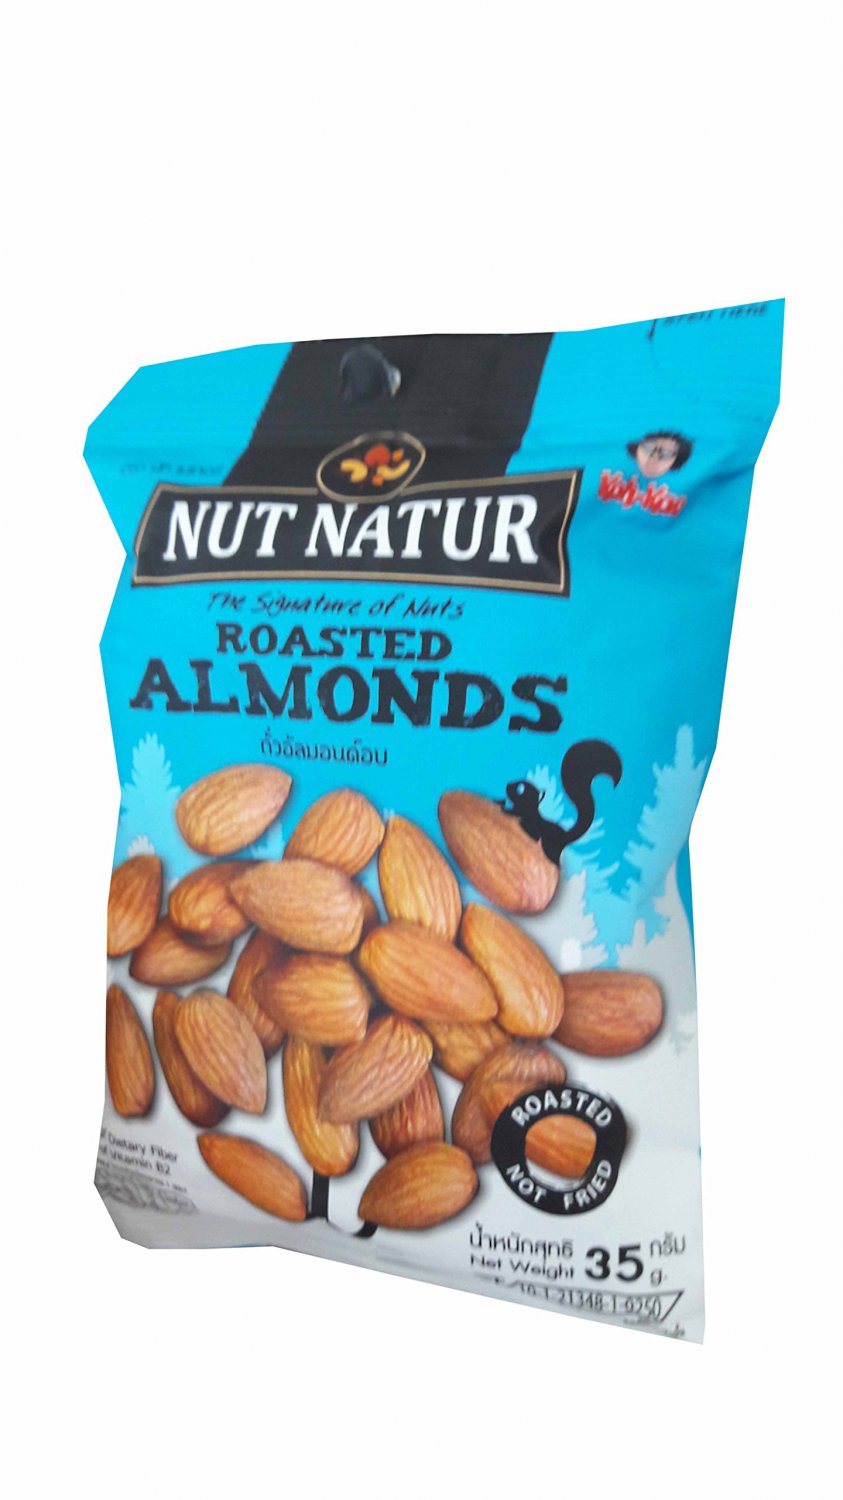 3 packs of Roasted Almonds. The Signature of Nuts Roasted not Frie